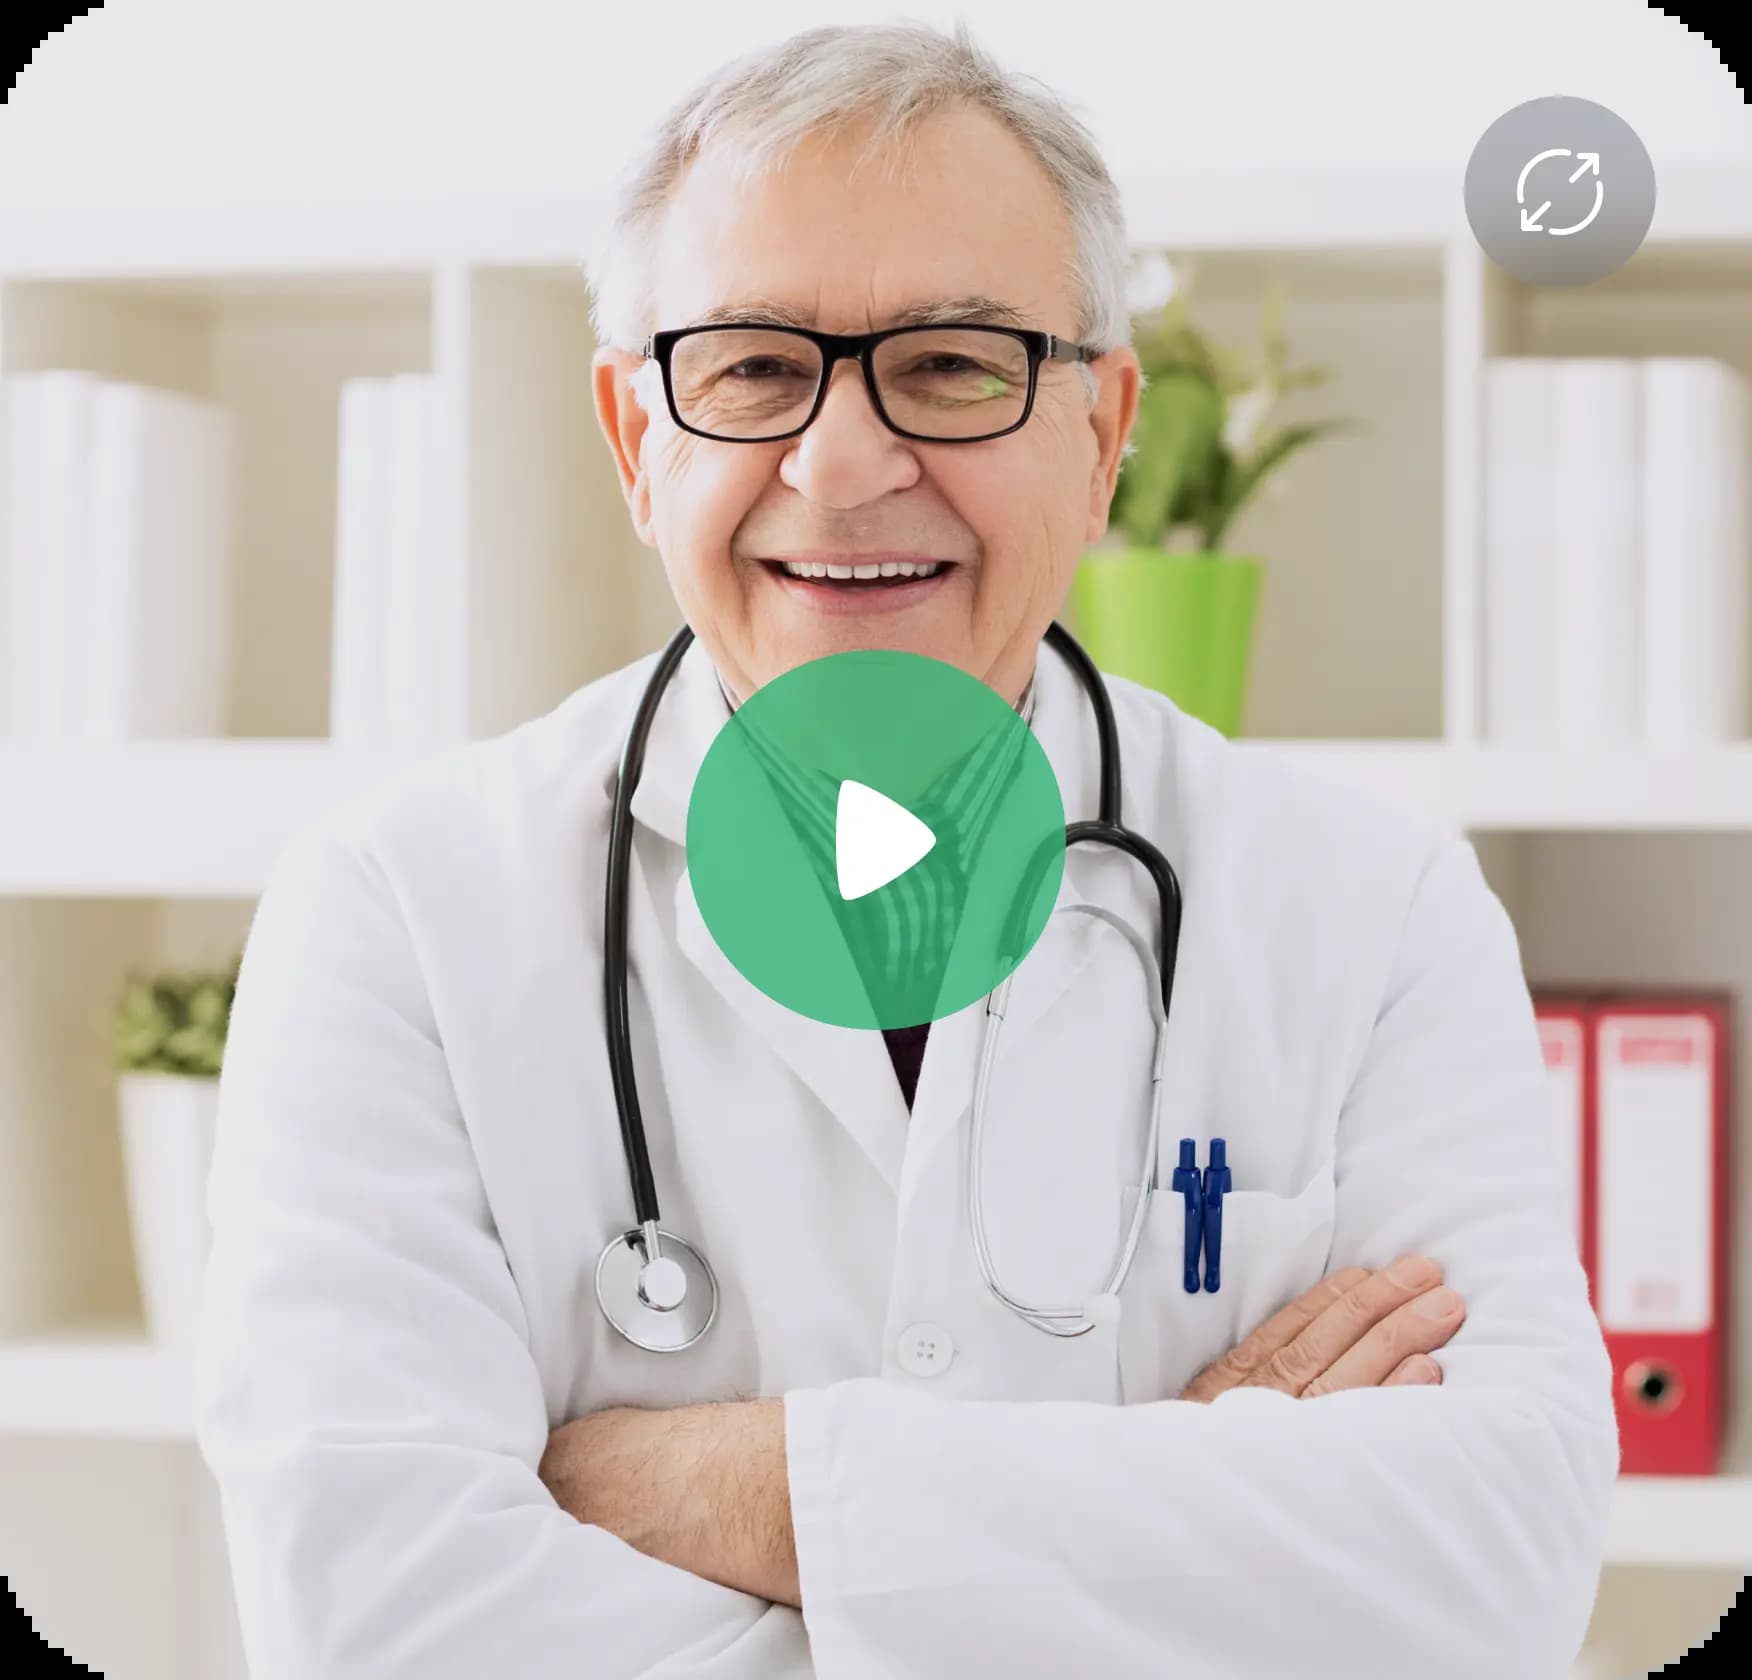 Virtual healthcare: A doctor and patient engage in a video consultation through an online platform.